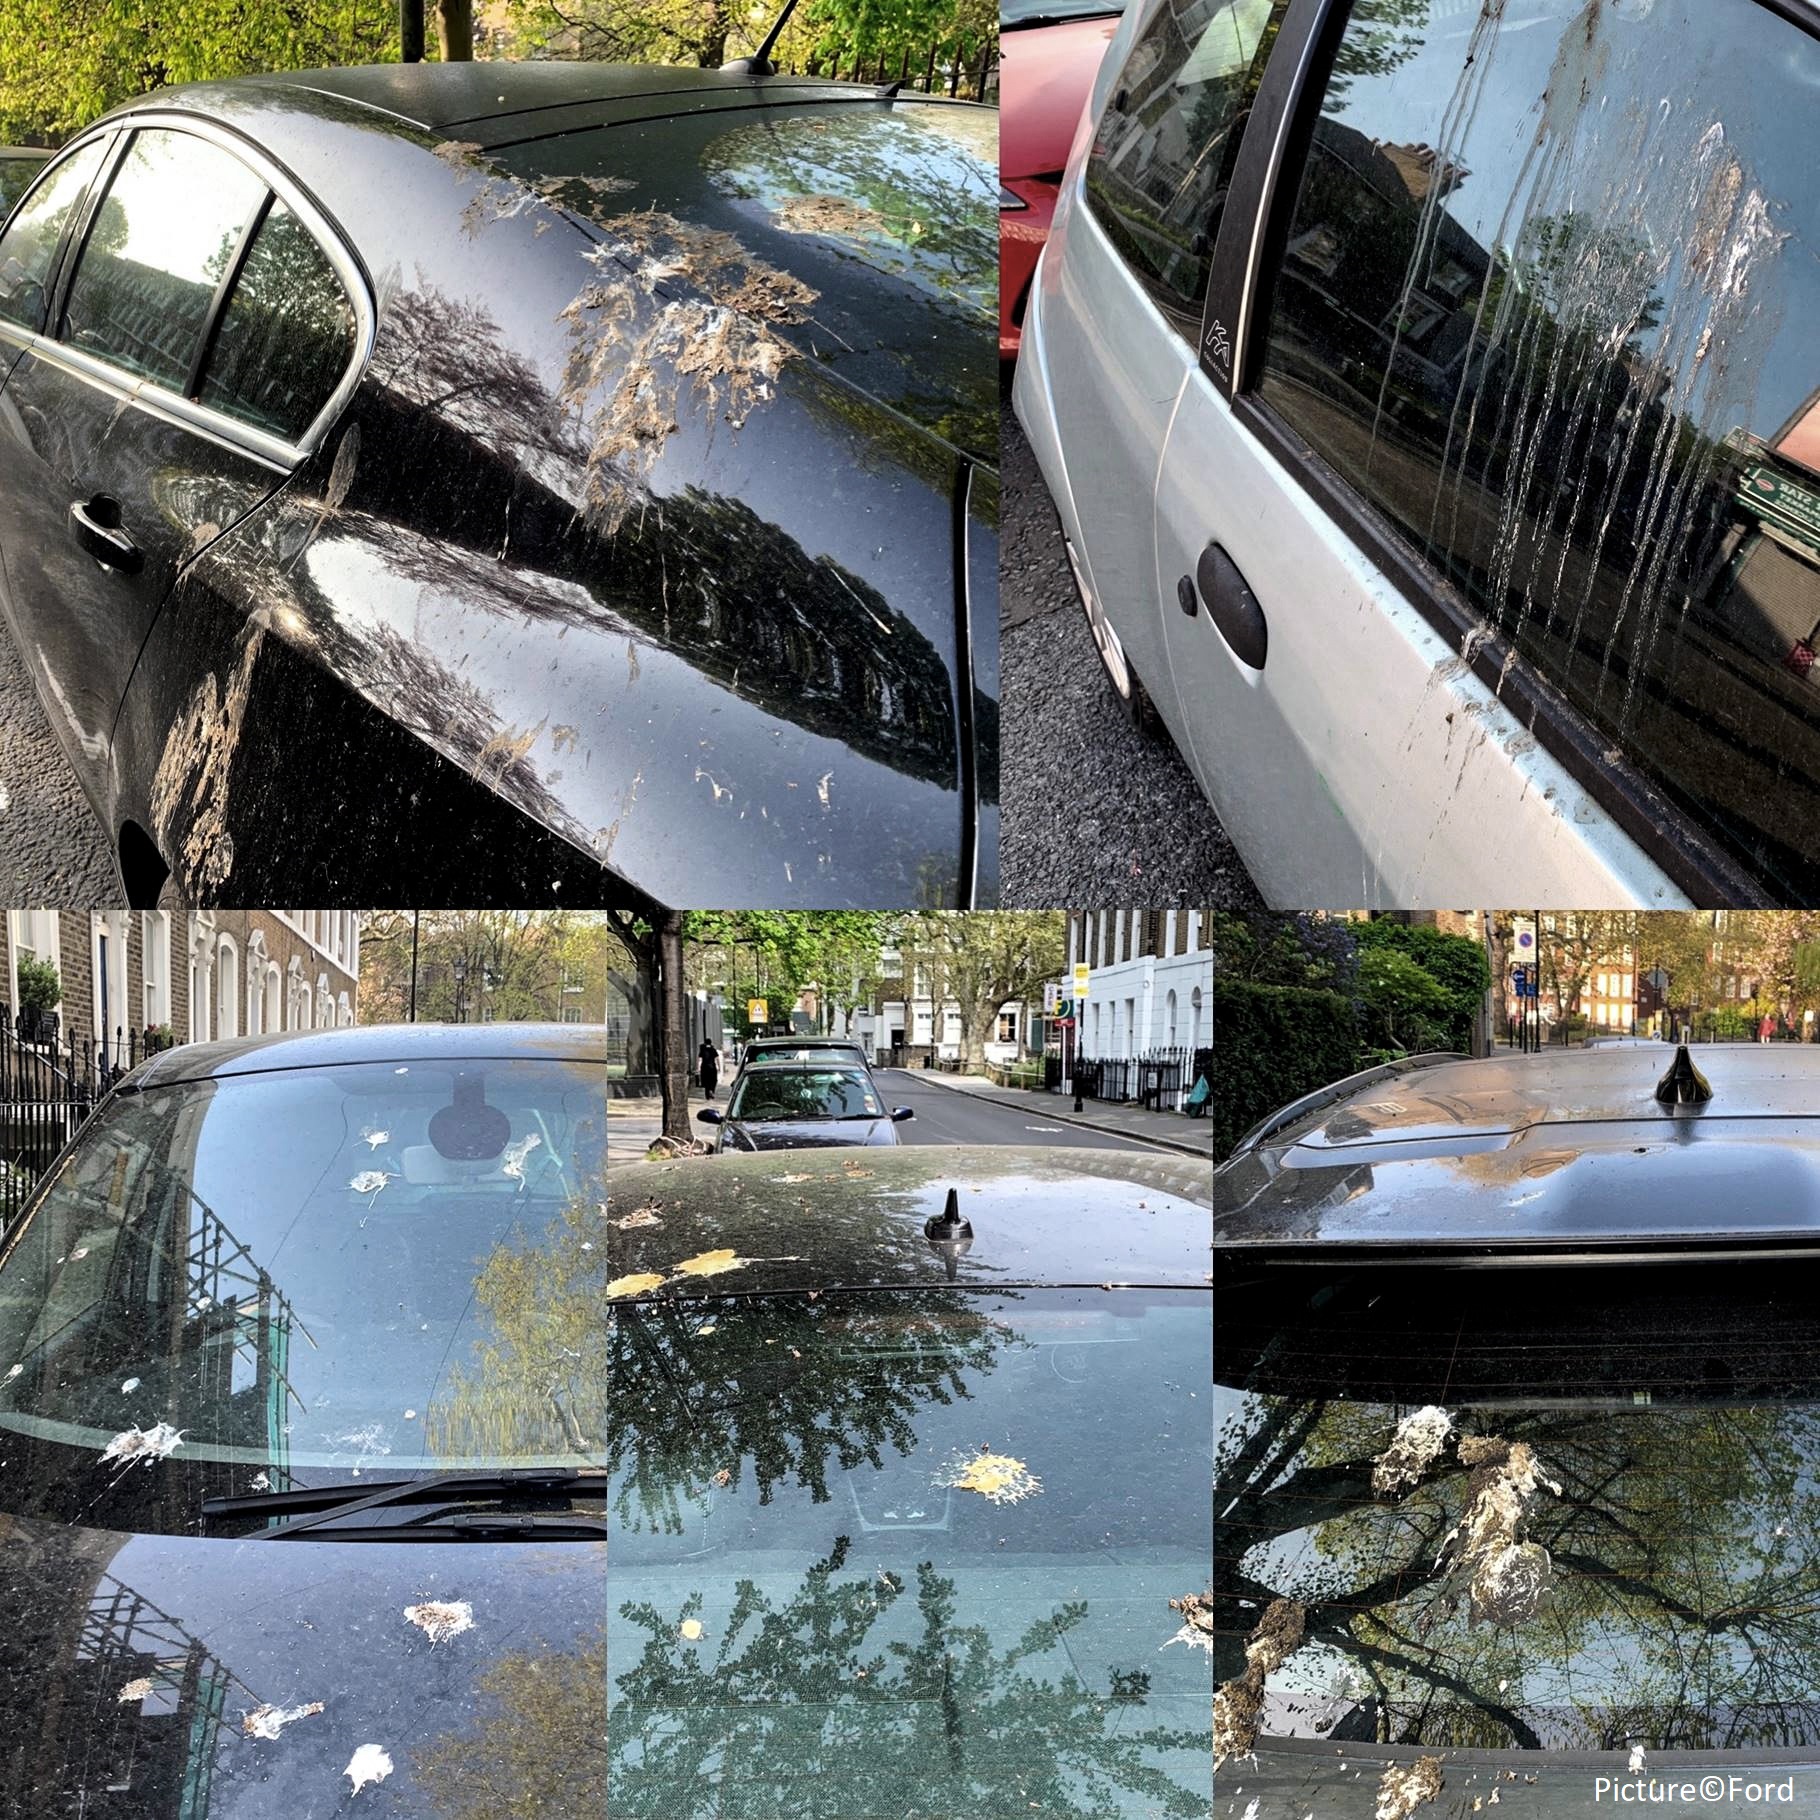 What’s the best way to clean bird poo off my car after lockdown?